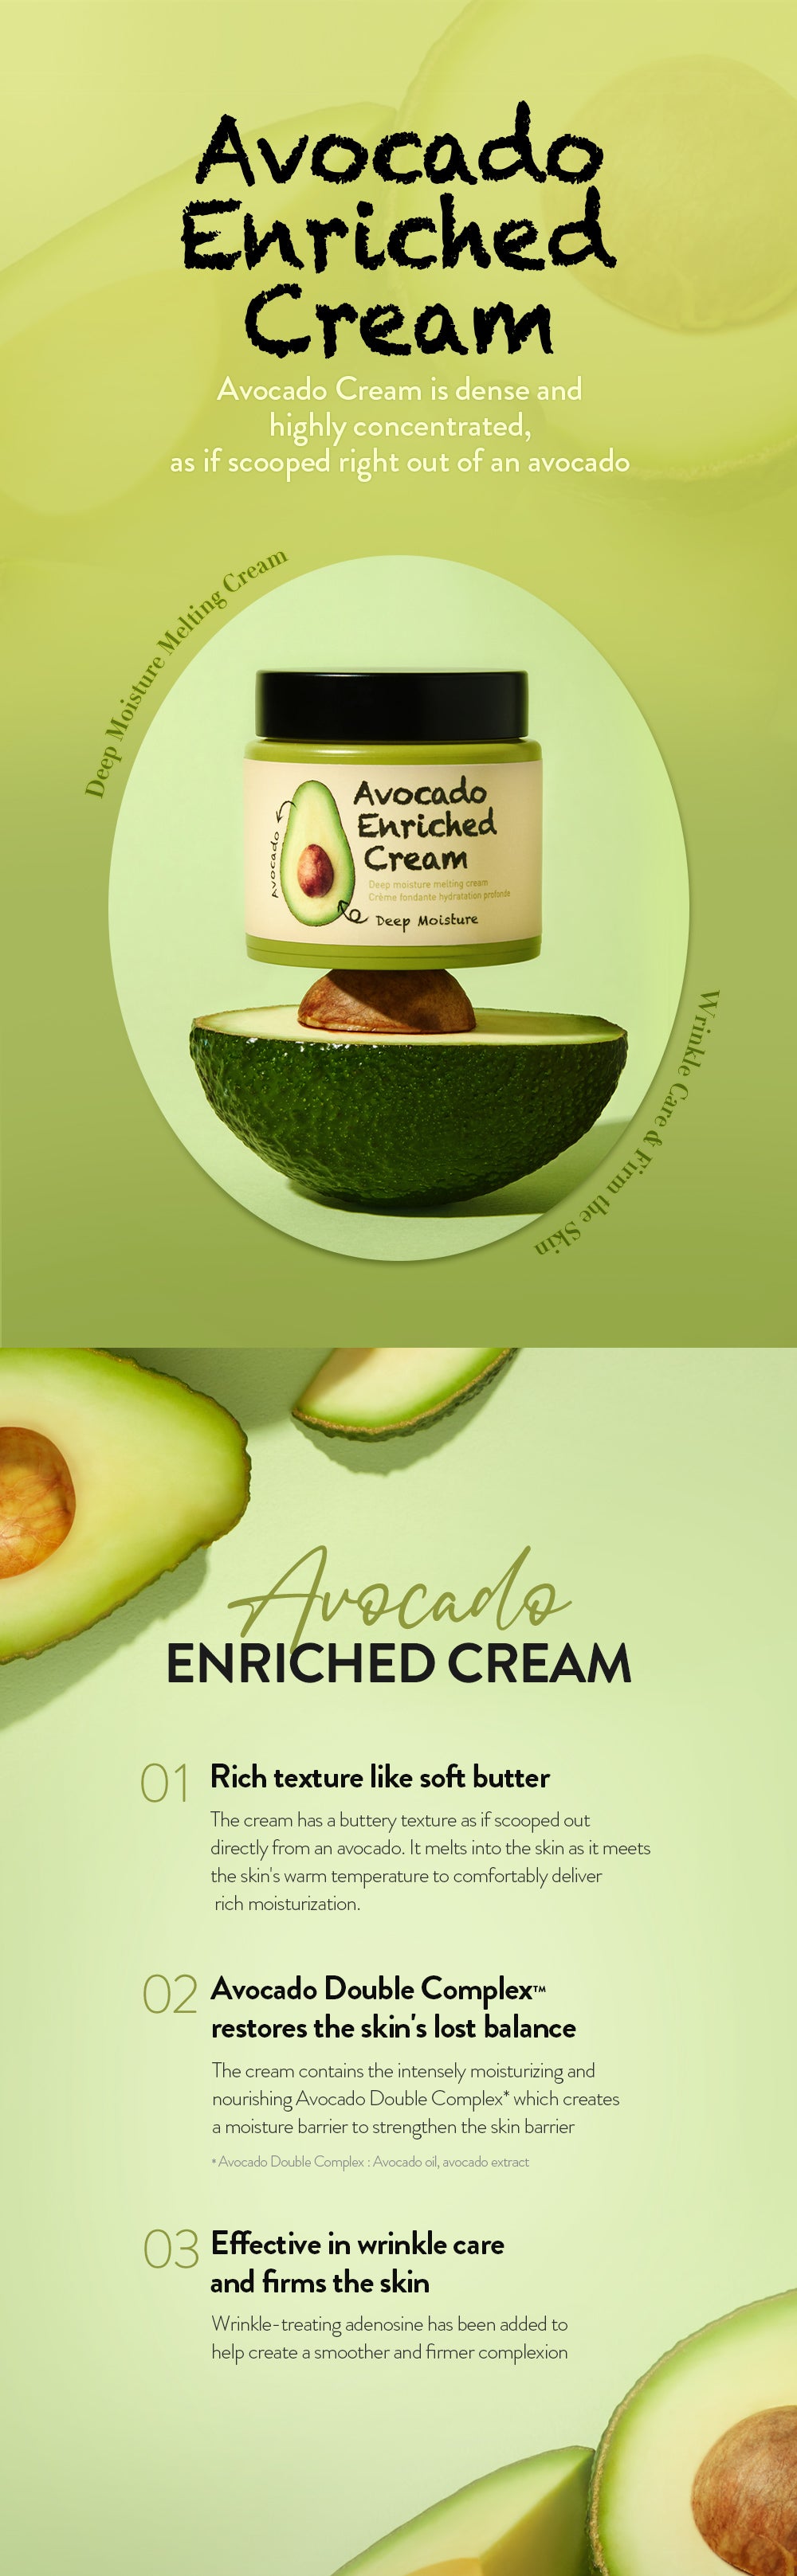 too_cool_for_school_avocado_enriched_cream_1